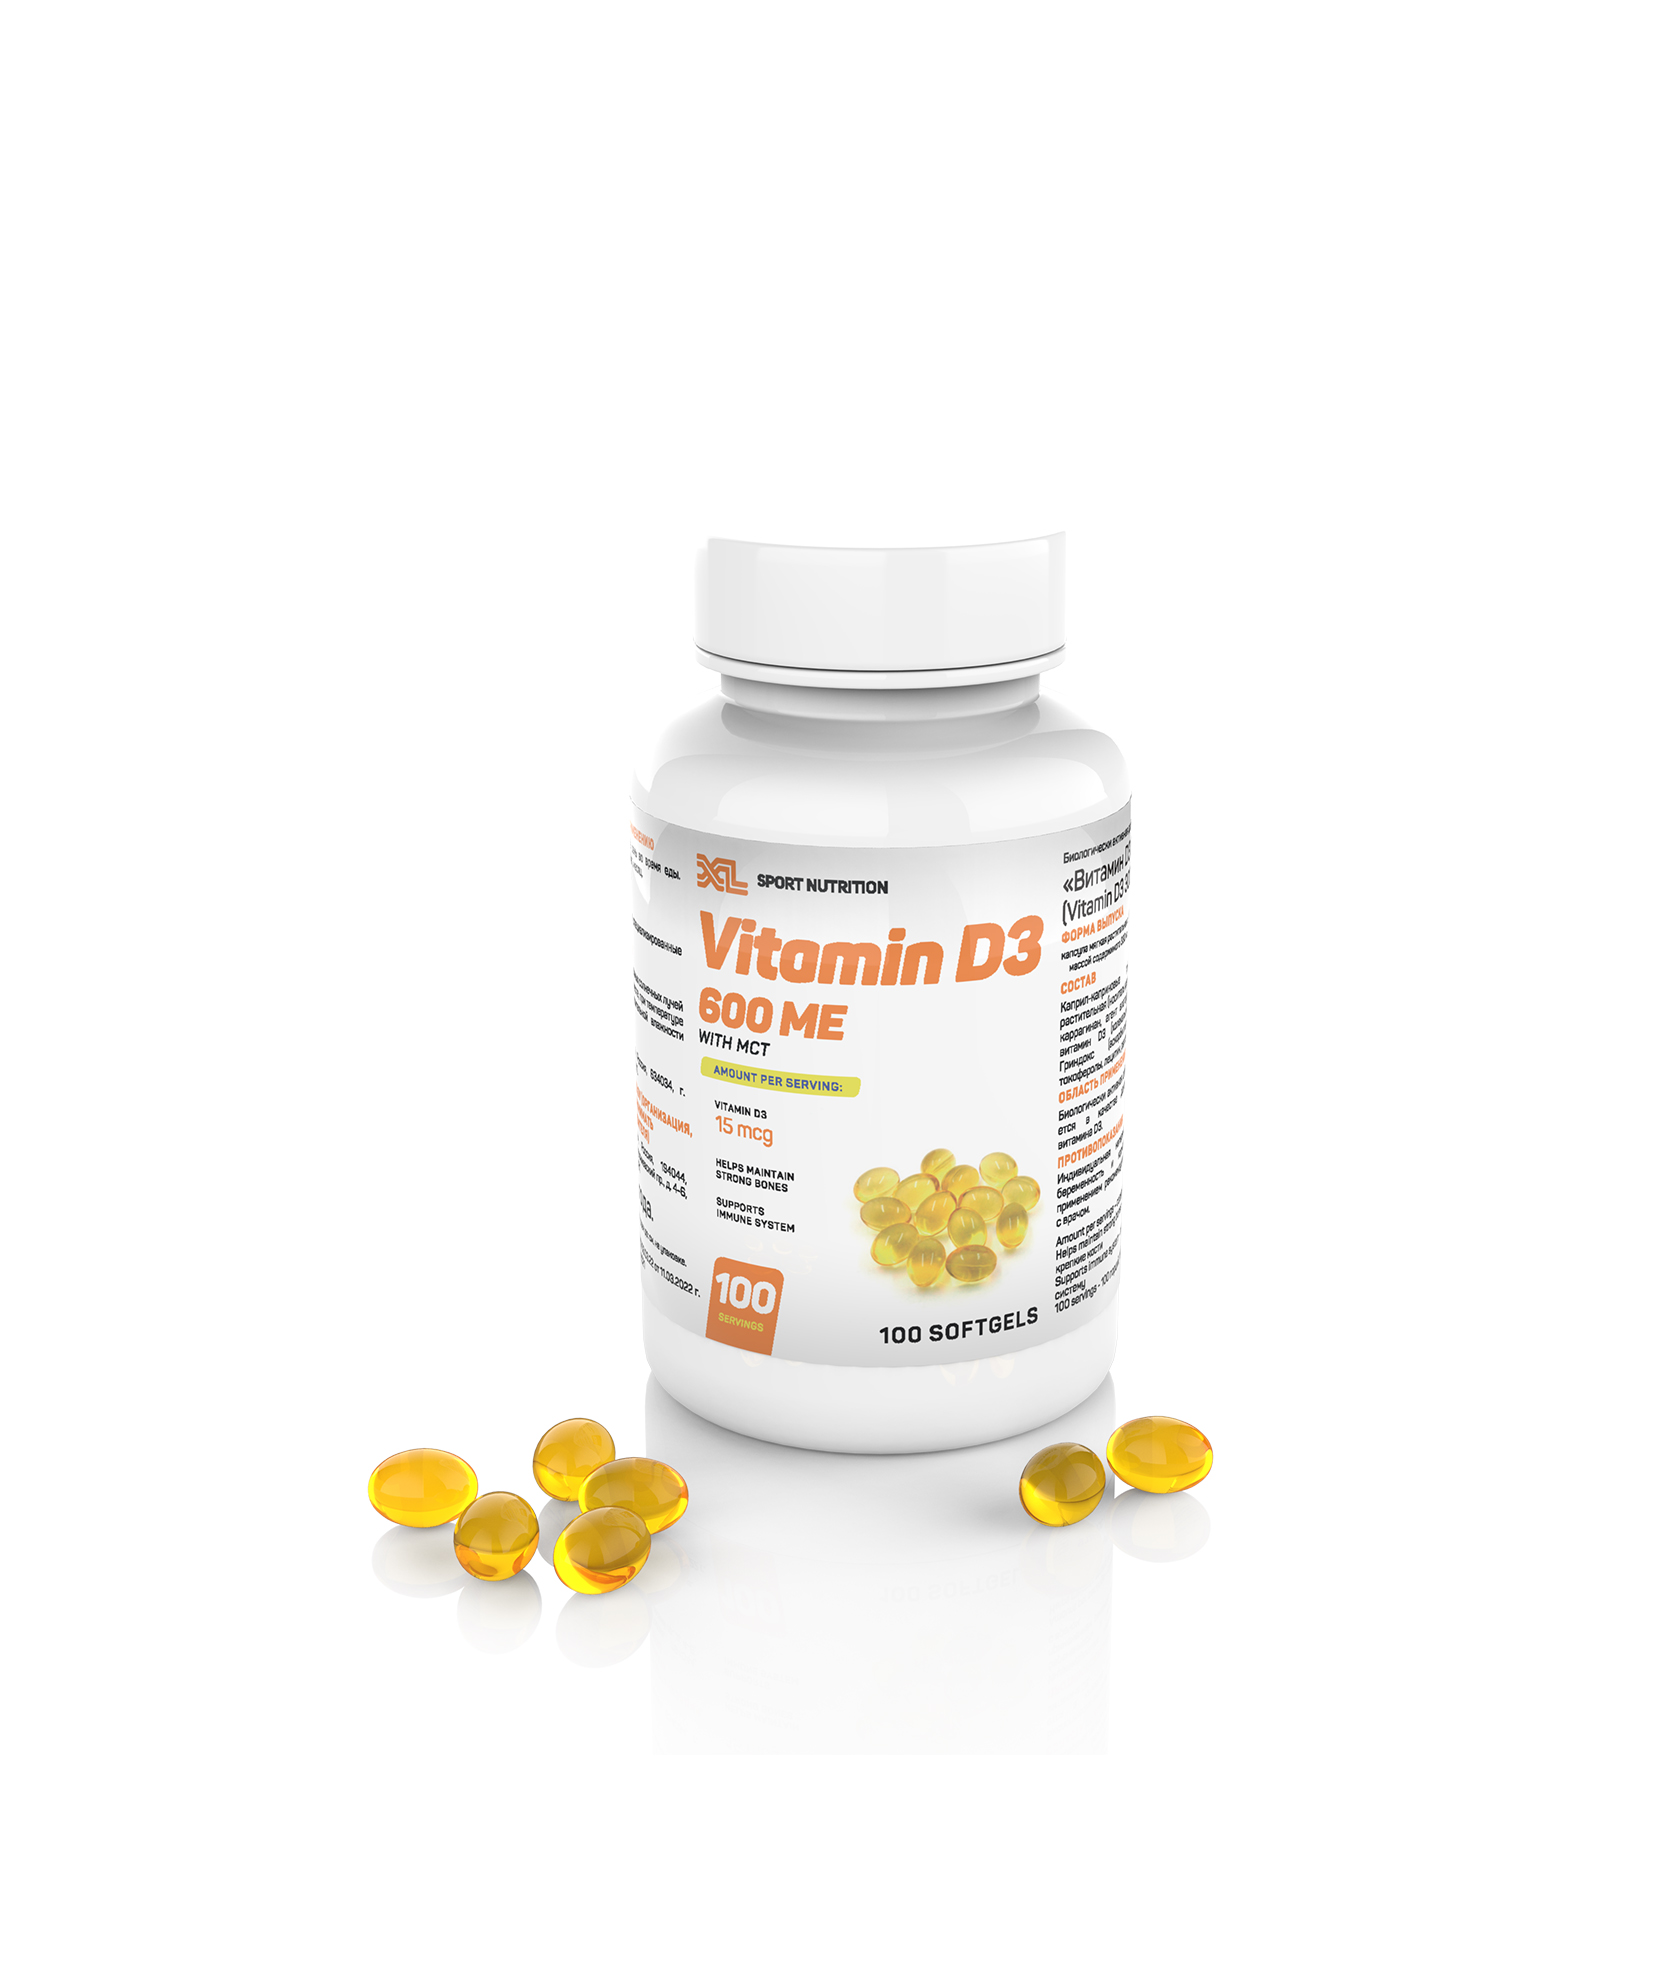 XL Vitamin D3 600 ME with MCT, 100 softgels